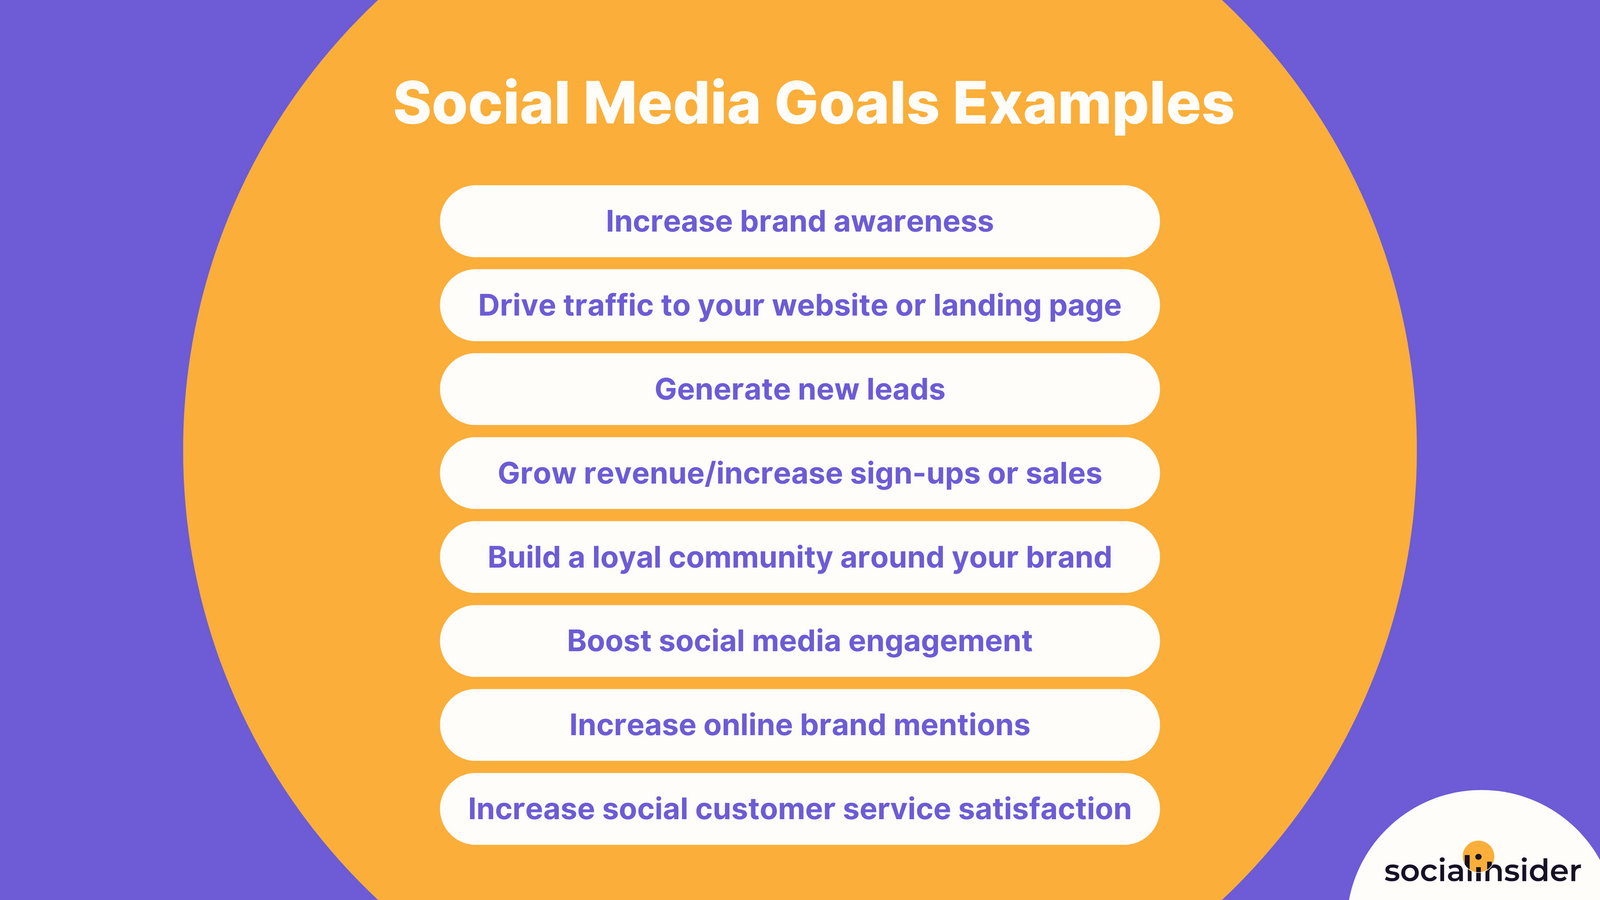 visual with a yellow round form and social media goals examples in it